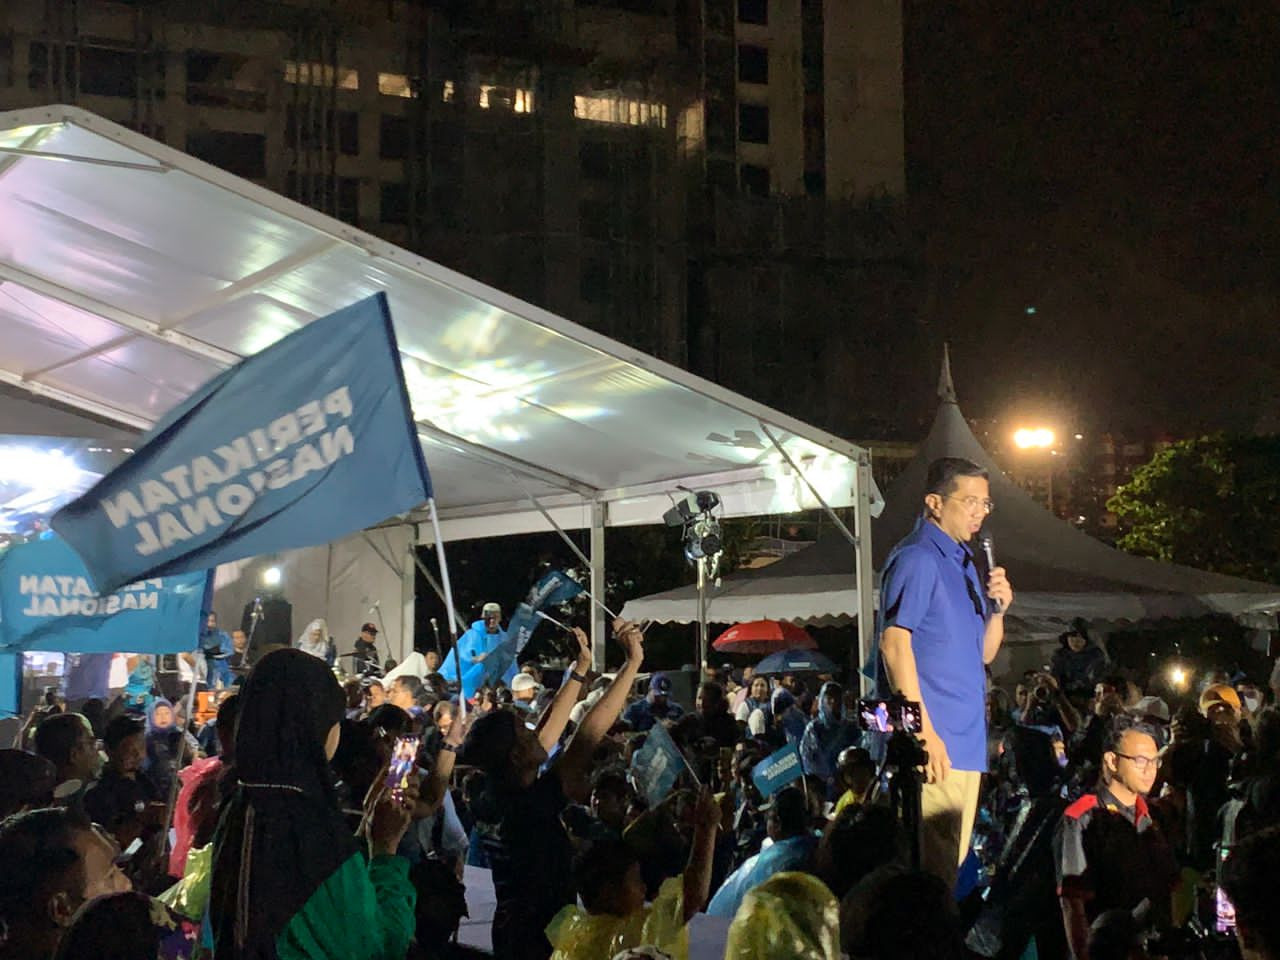 Bersatu supreme council member Datuk Seri Mohamed Azmin Ali (pic) speaking to the crowd of hundreds tonight in Taman Keramat. The loudest cheers were reserved for PN chairman Tan Sri Muhyiddin Yassin and Azmin, who are respectively defending their Pagoh and Gombak seats. – AMAR SHAH MOHSEN/The Vibes, November 15, 2022